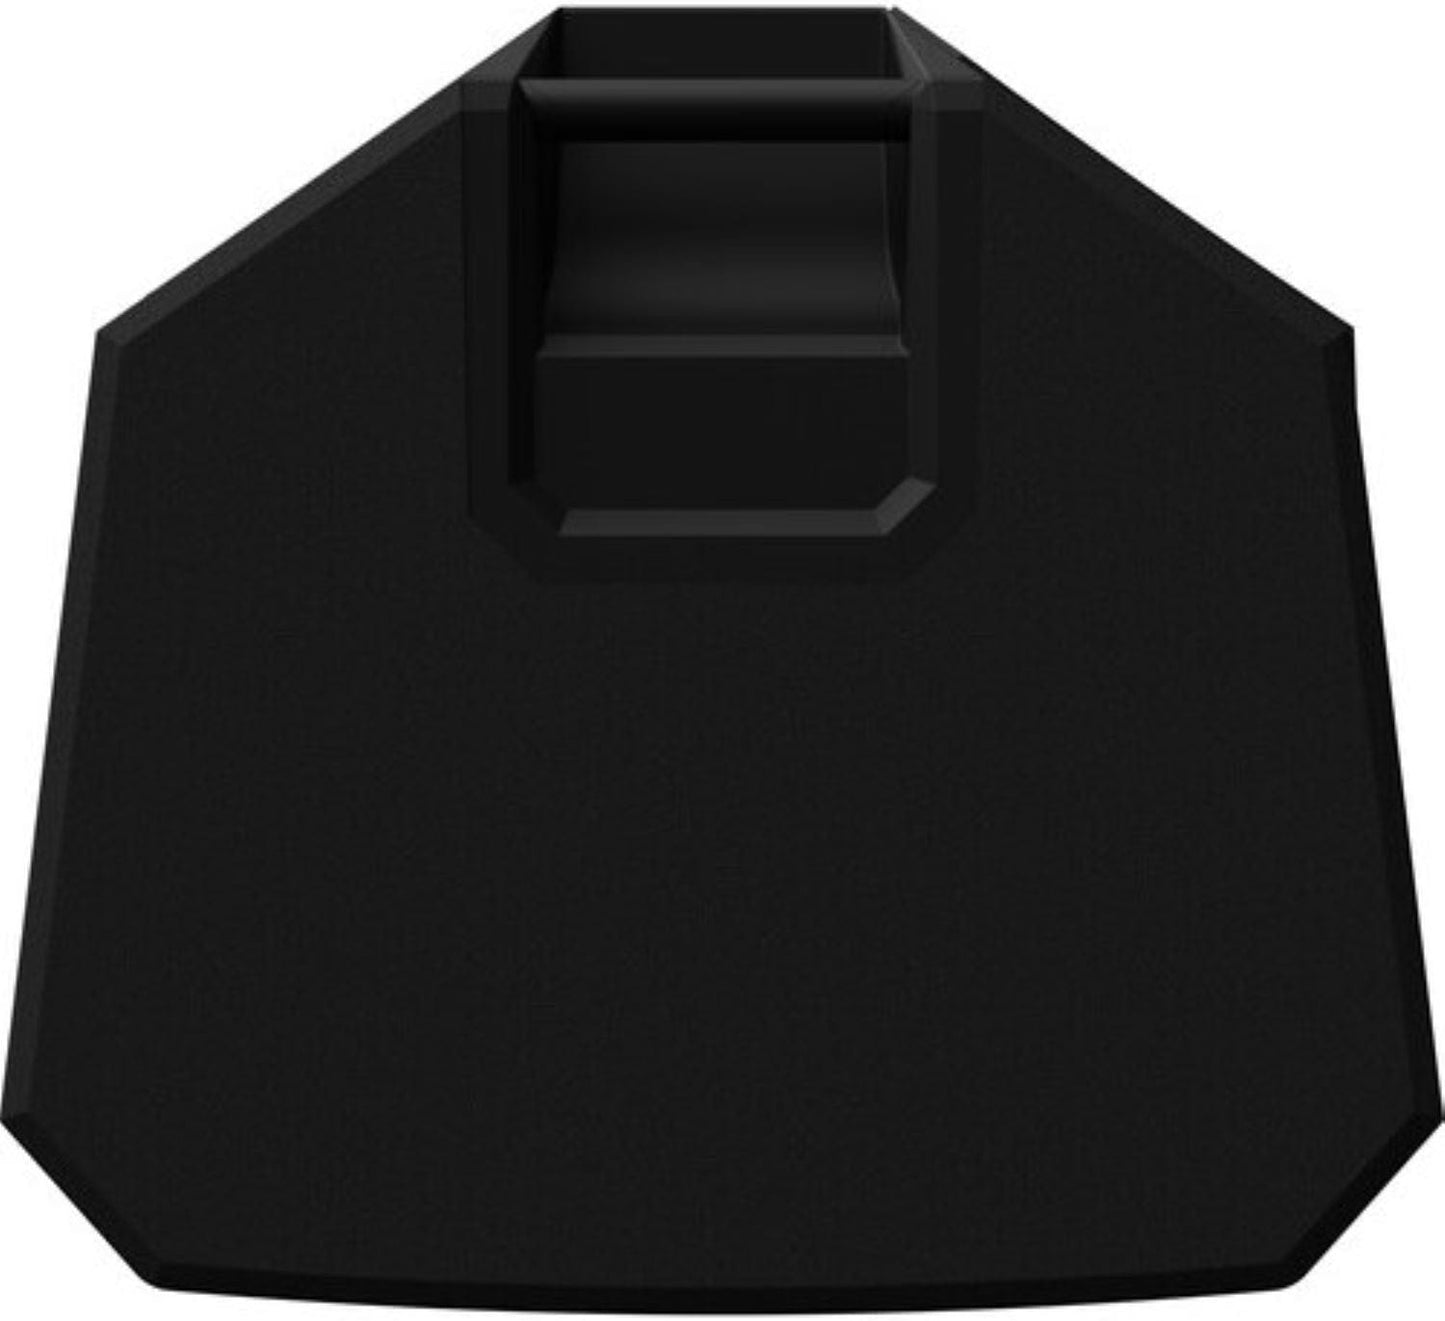 Electro-Voice ZLX-15 G2 15-Inch 2-Way Passive Speaker - PSSL ProSound and Stage Lighting 